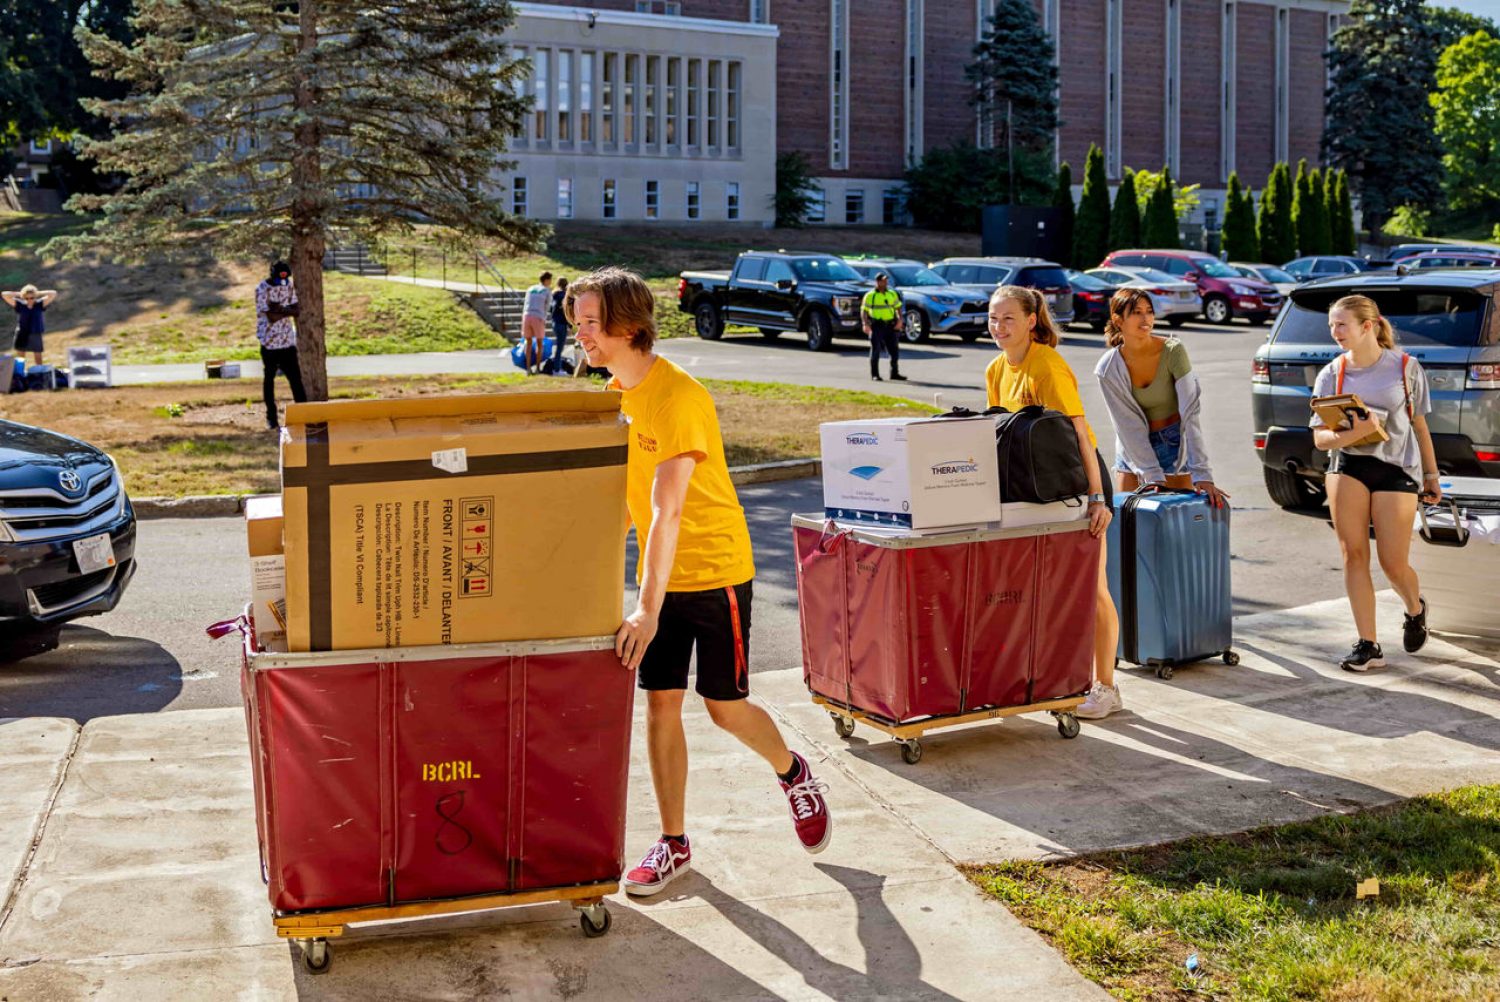 Welcome Wagon Members Assisting with Newton Campus Move-In